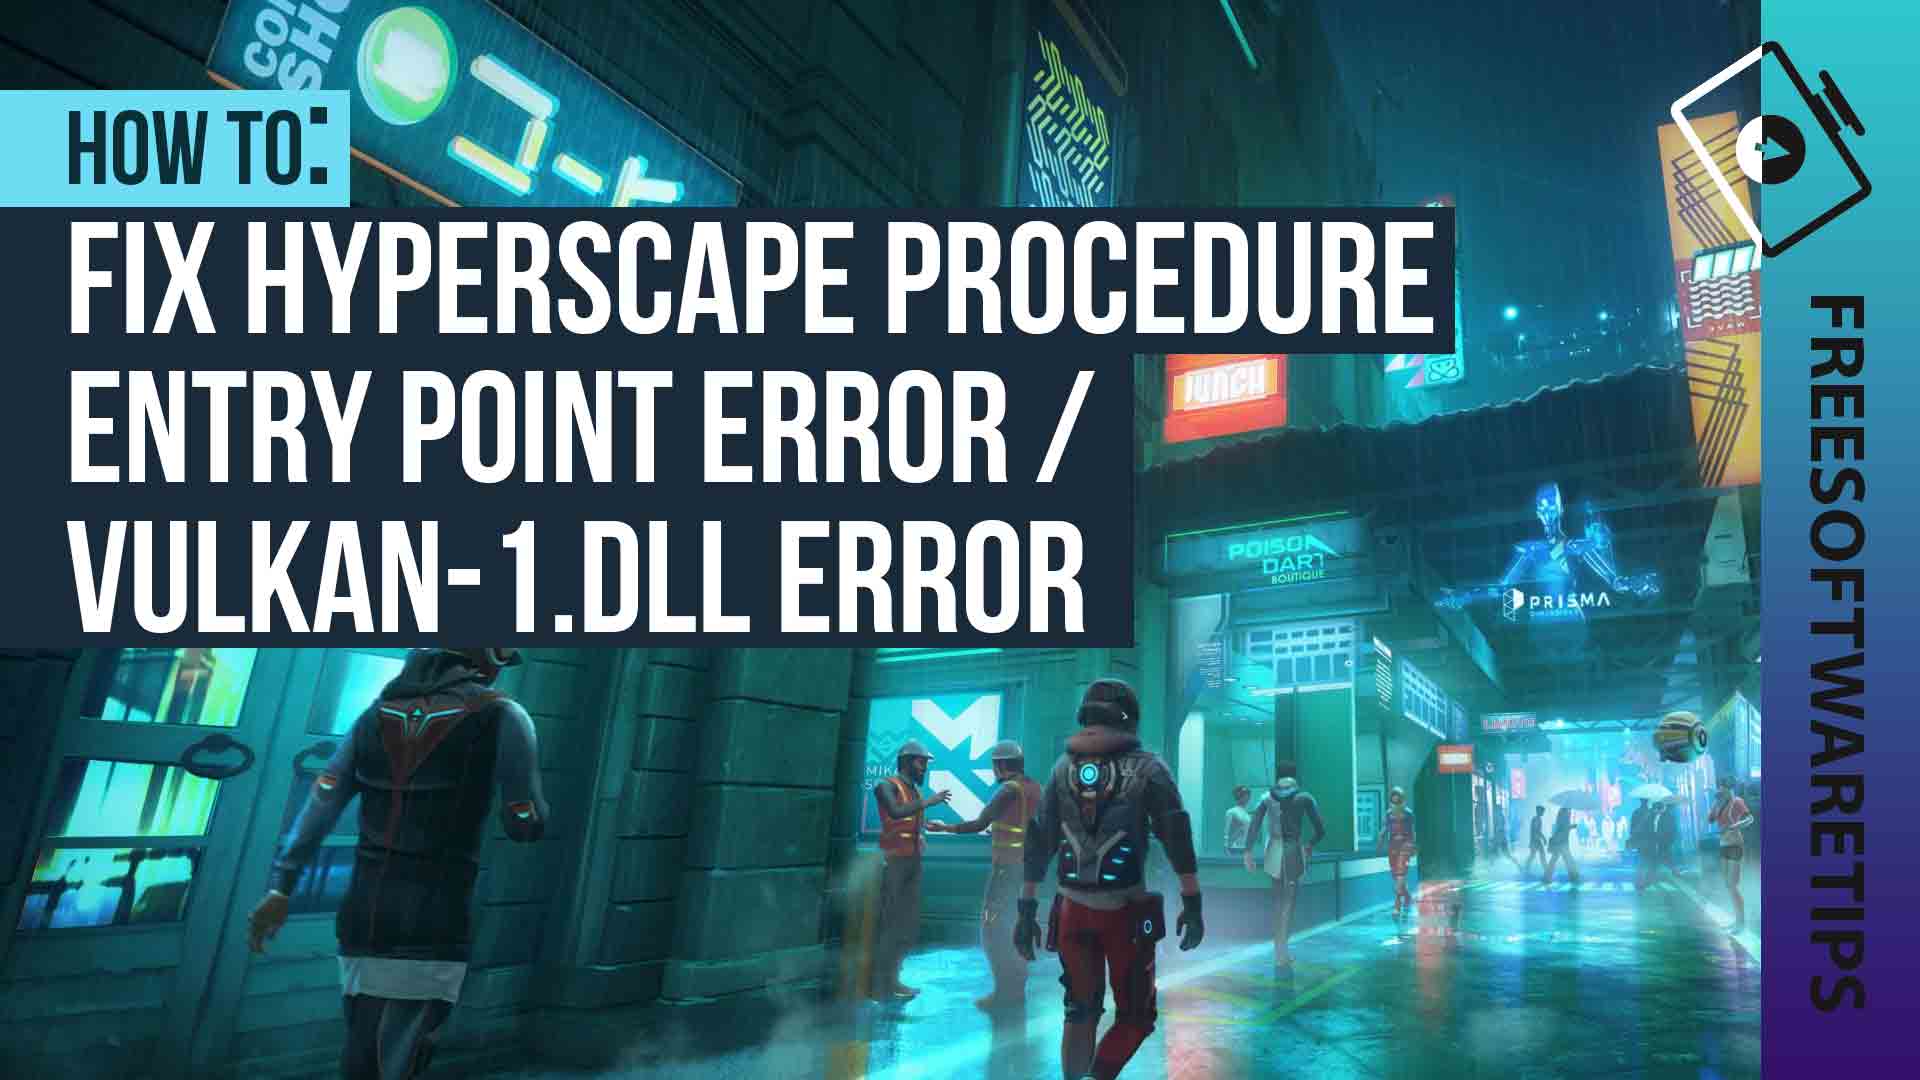 How to fix Hyperscape the procedure entry point error or vulkan-1 dll error